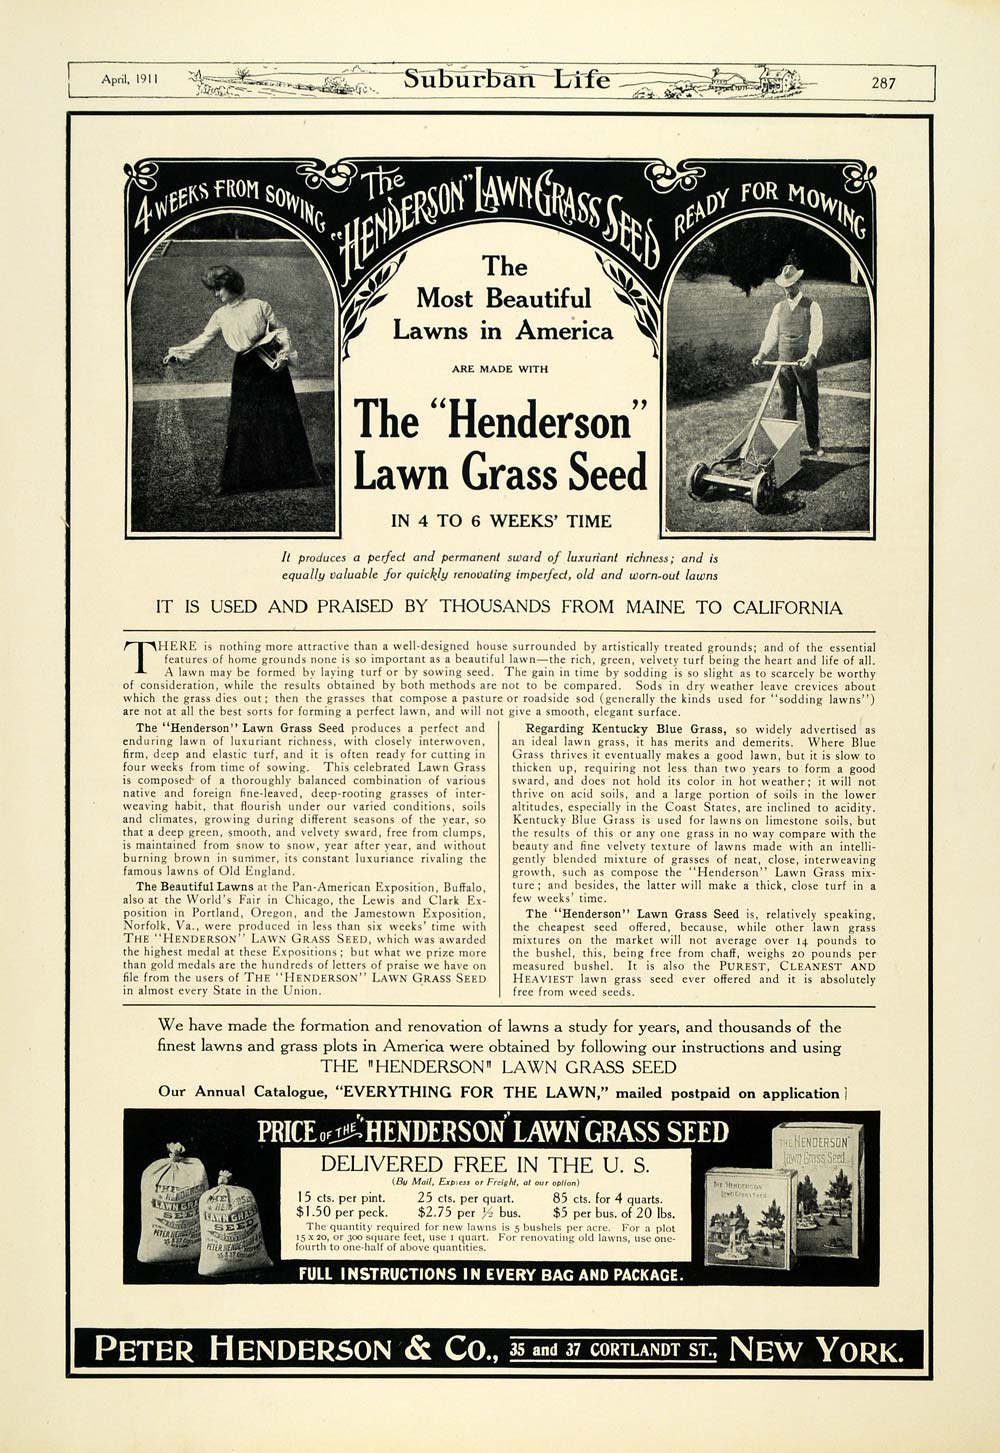 1911 Ad Peter Henderson Lawn Grass Seed Landscaping - ORIGINAL ADVERTISING SUB1